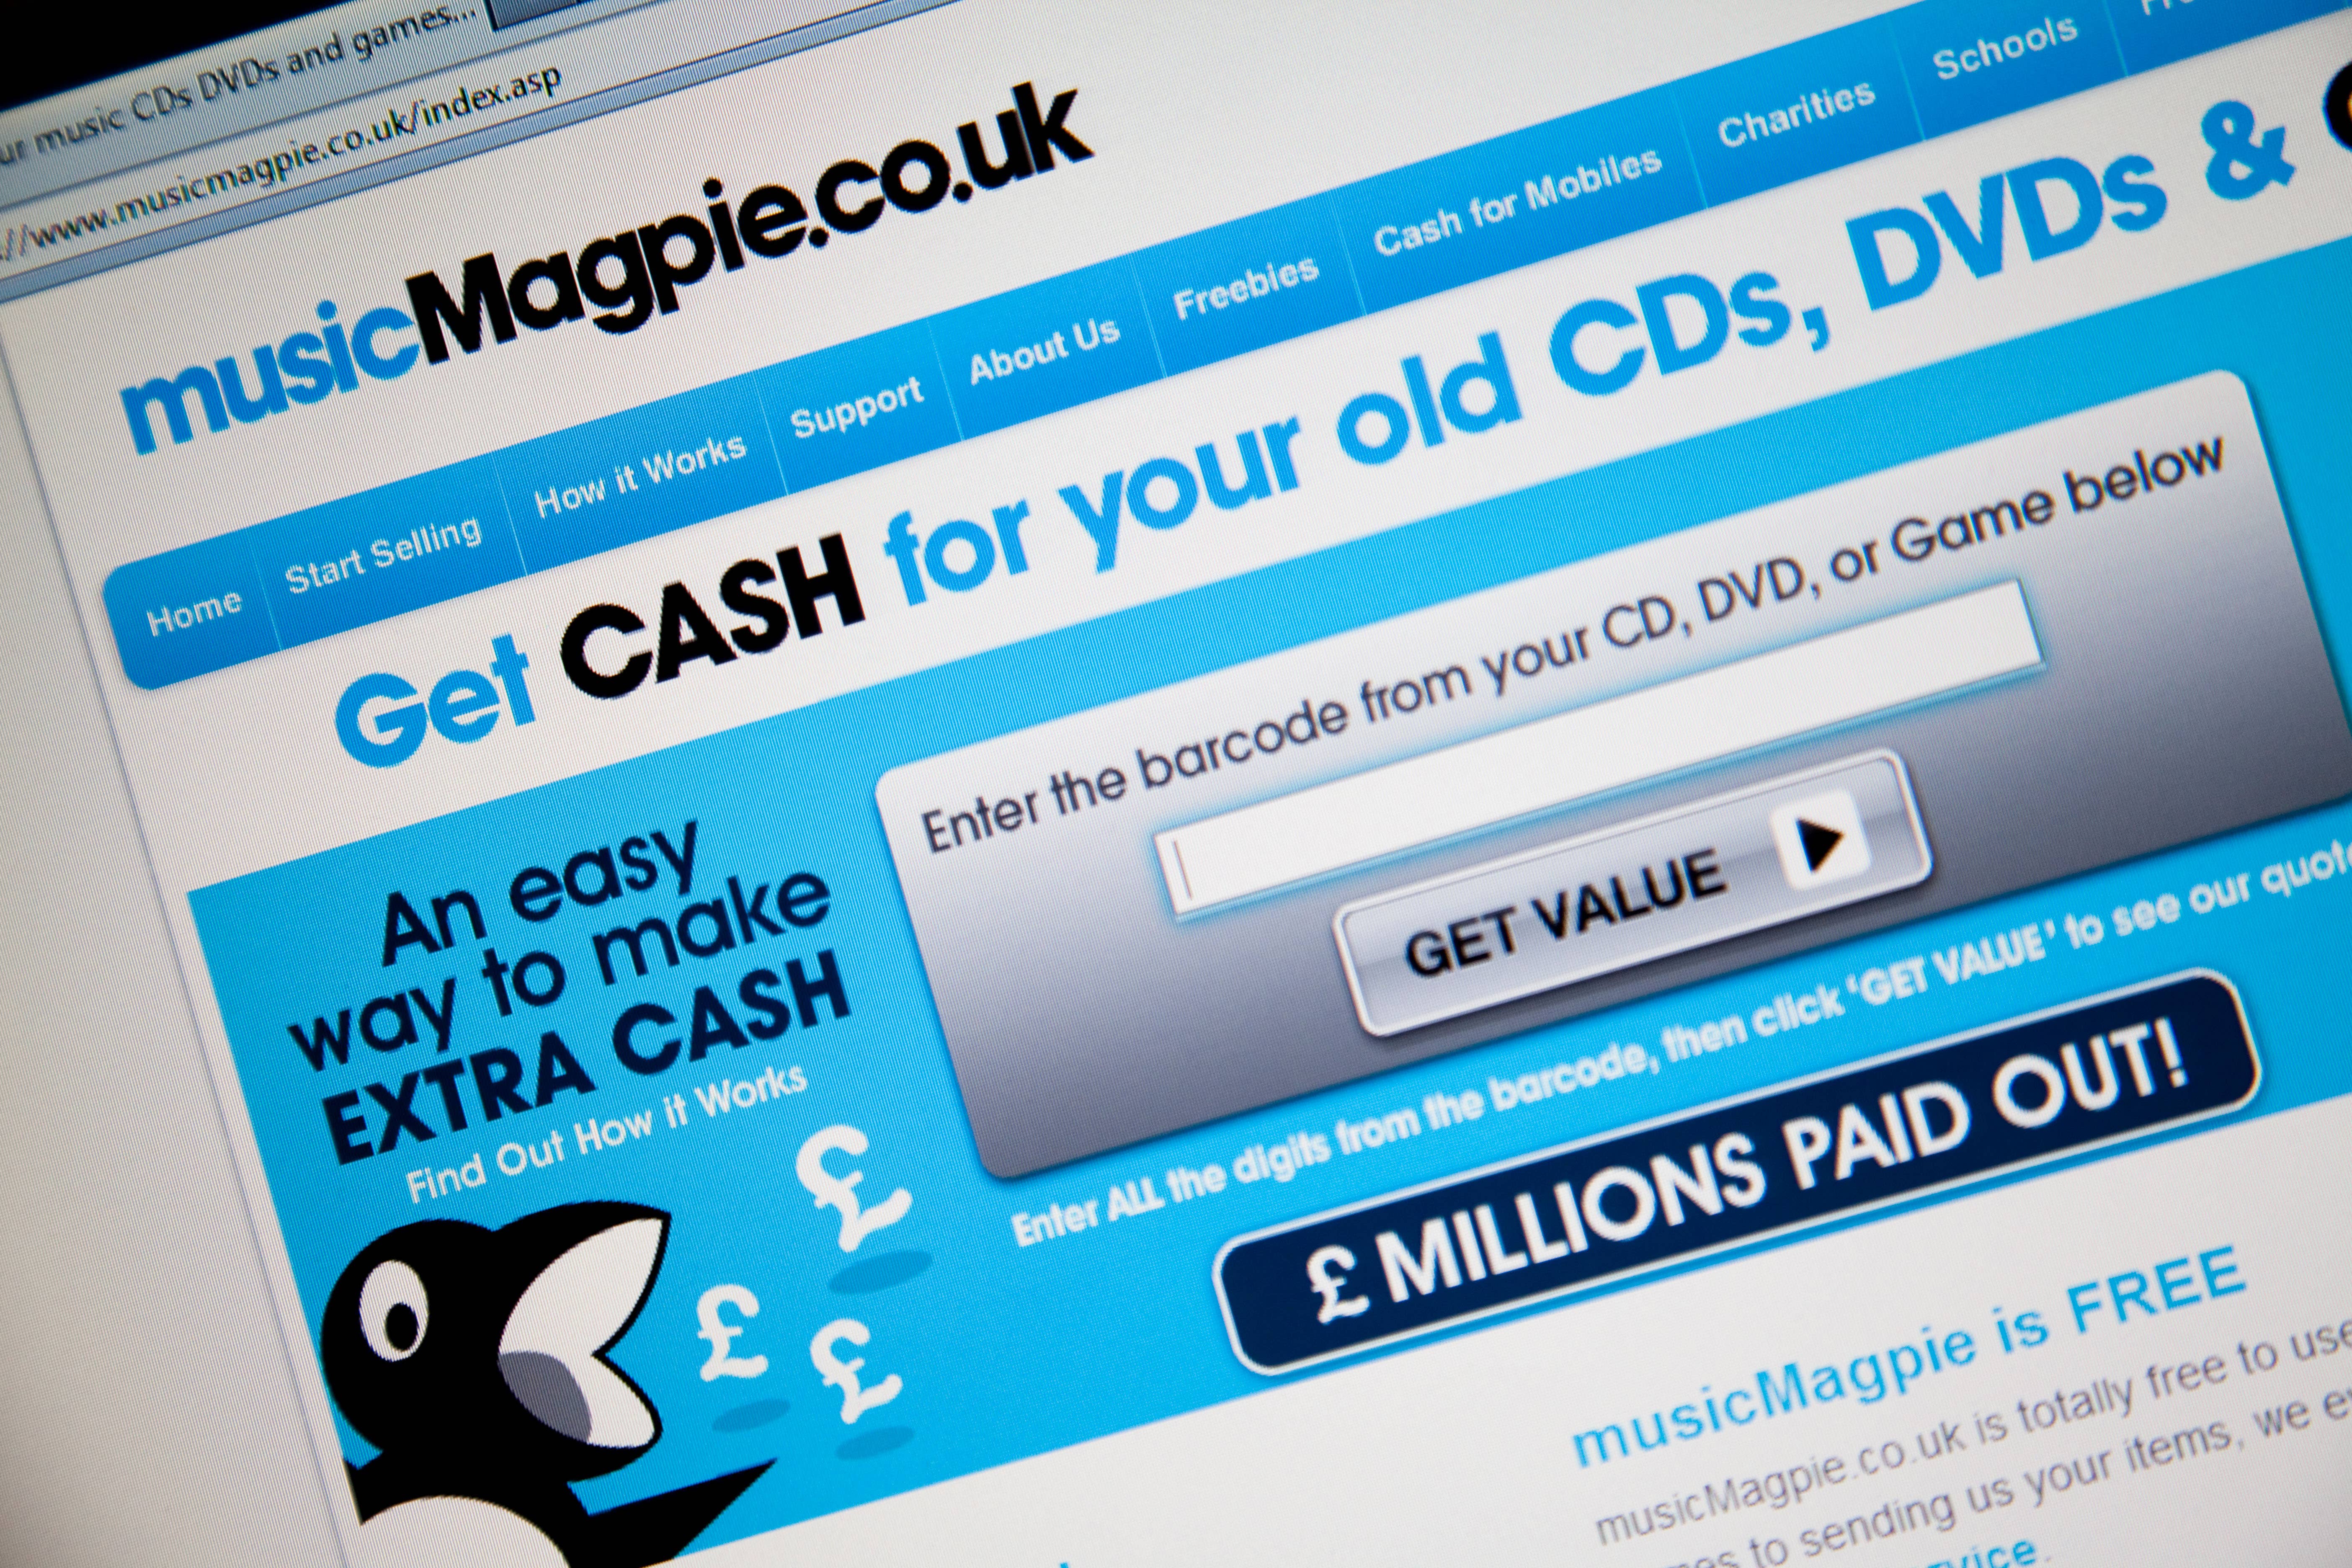 Stockport-based musicMagpie has seen its shares slump since a stock market flotation two-and-a-half years ago